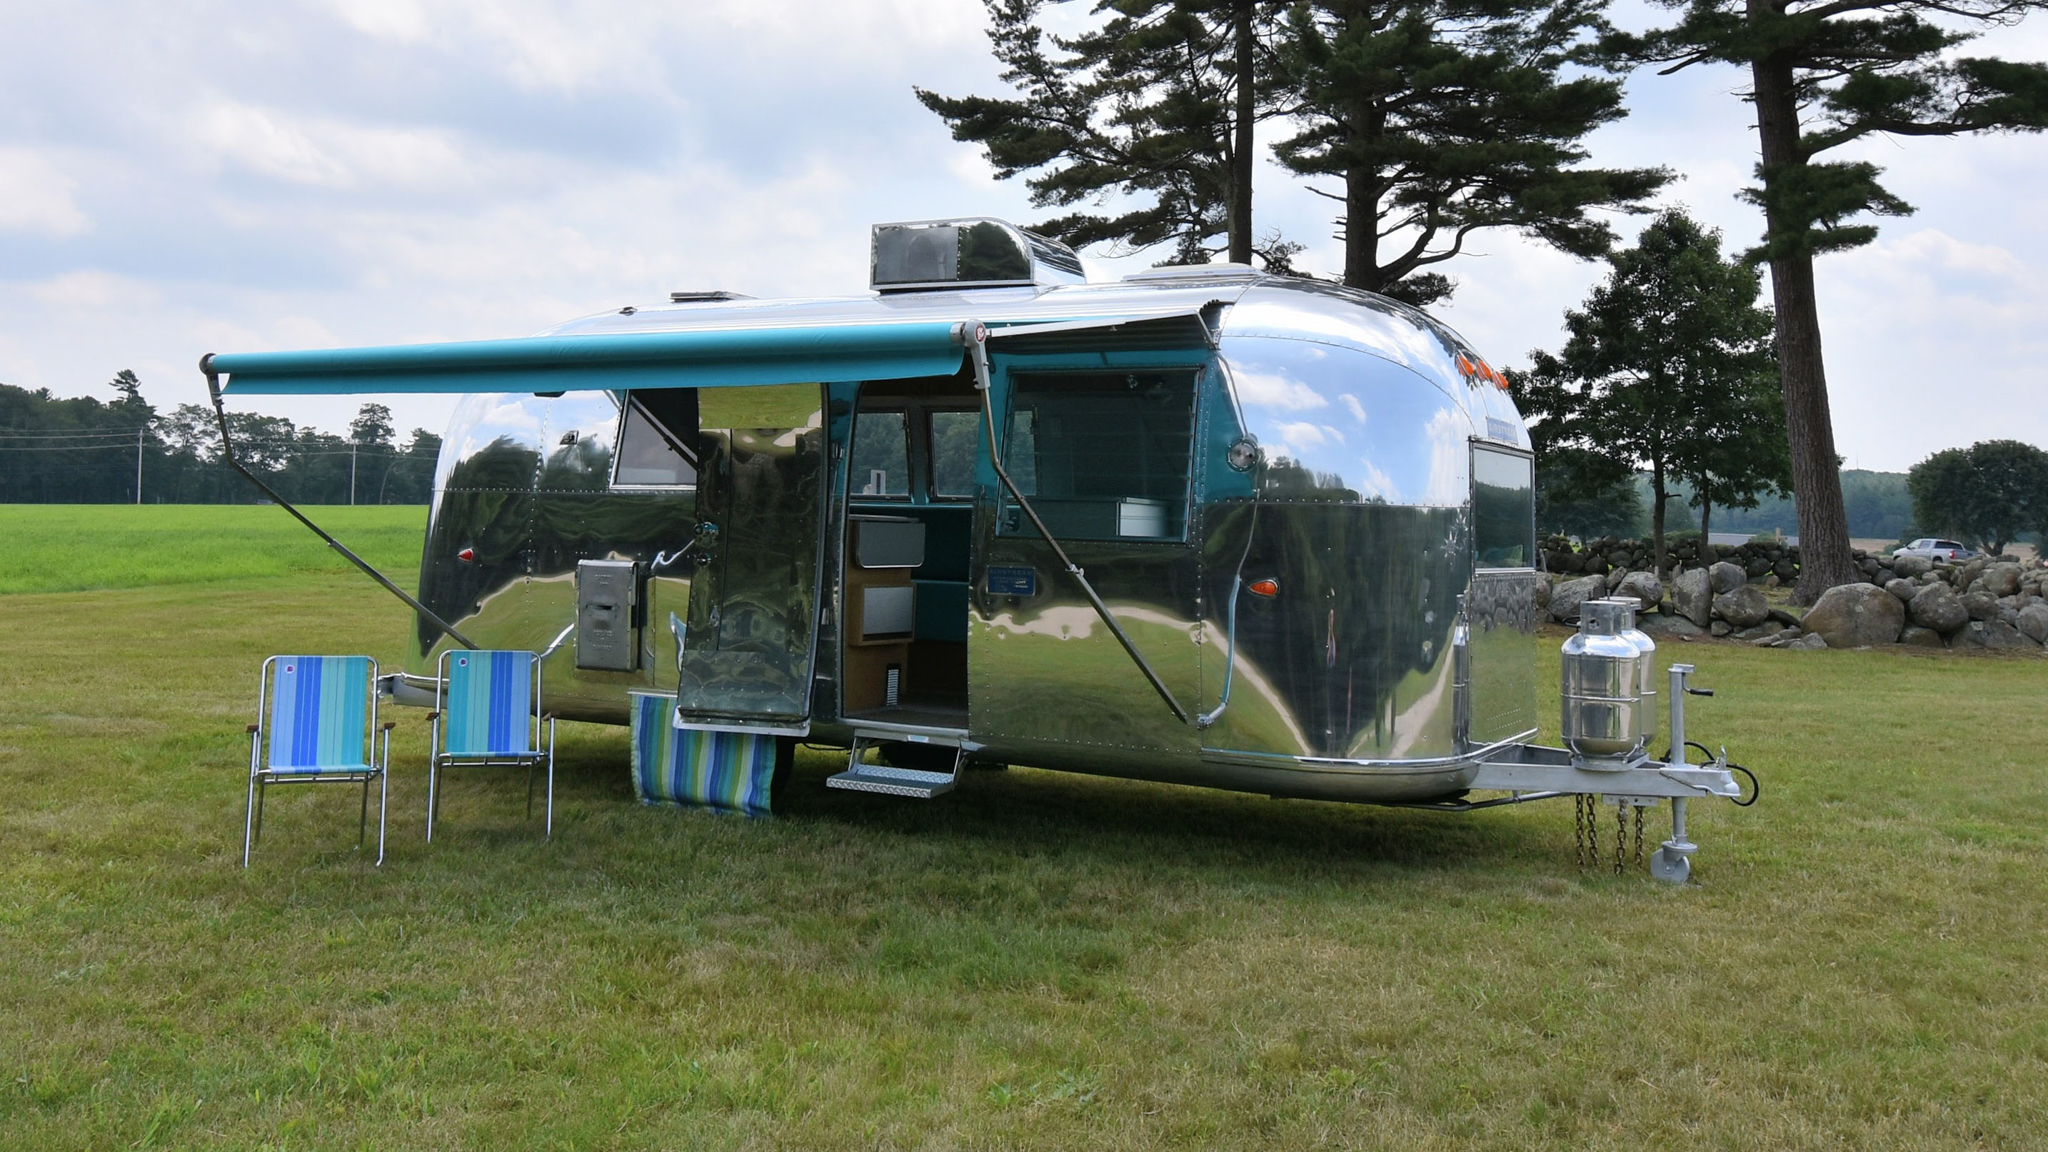 Vintage Airstream camper with awning up